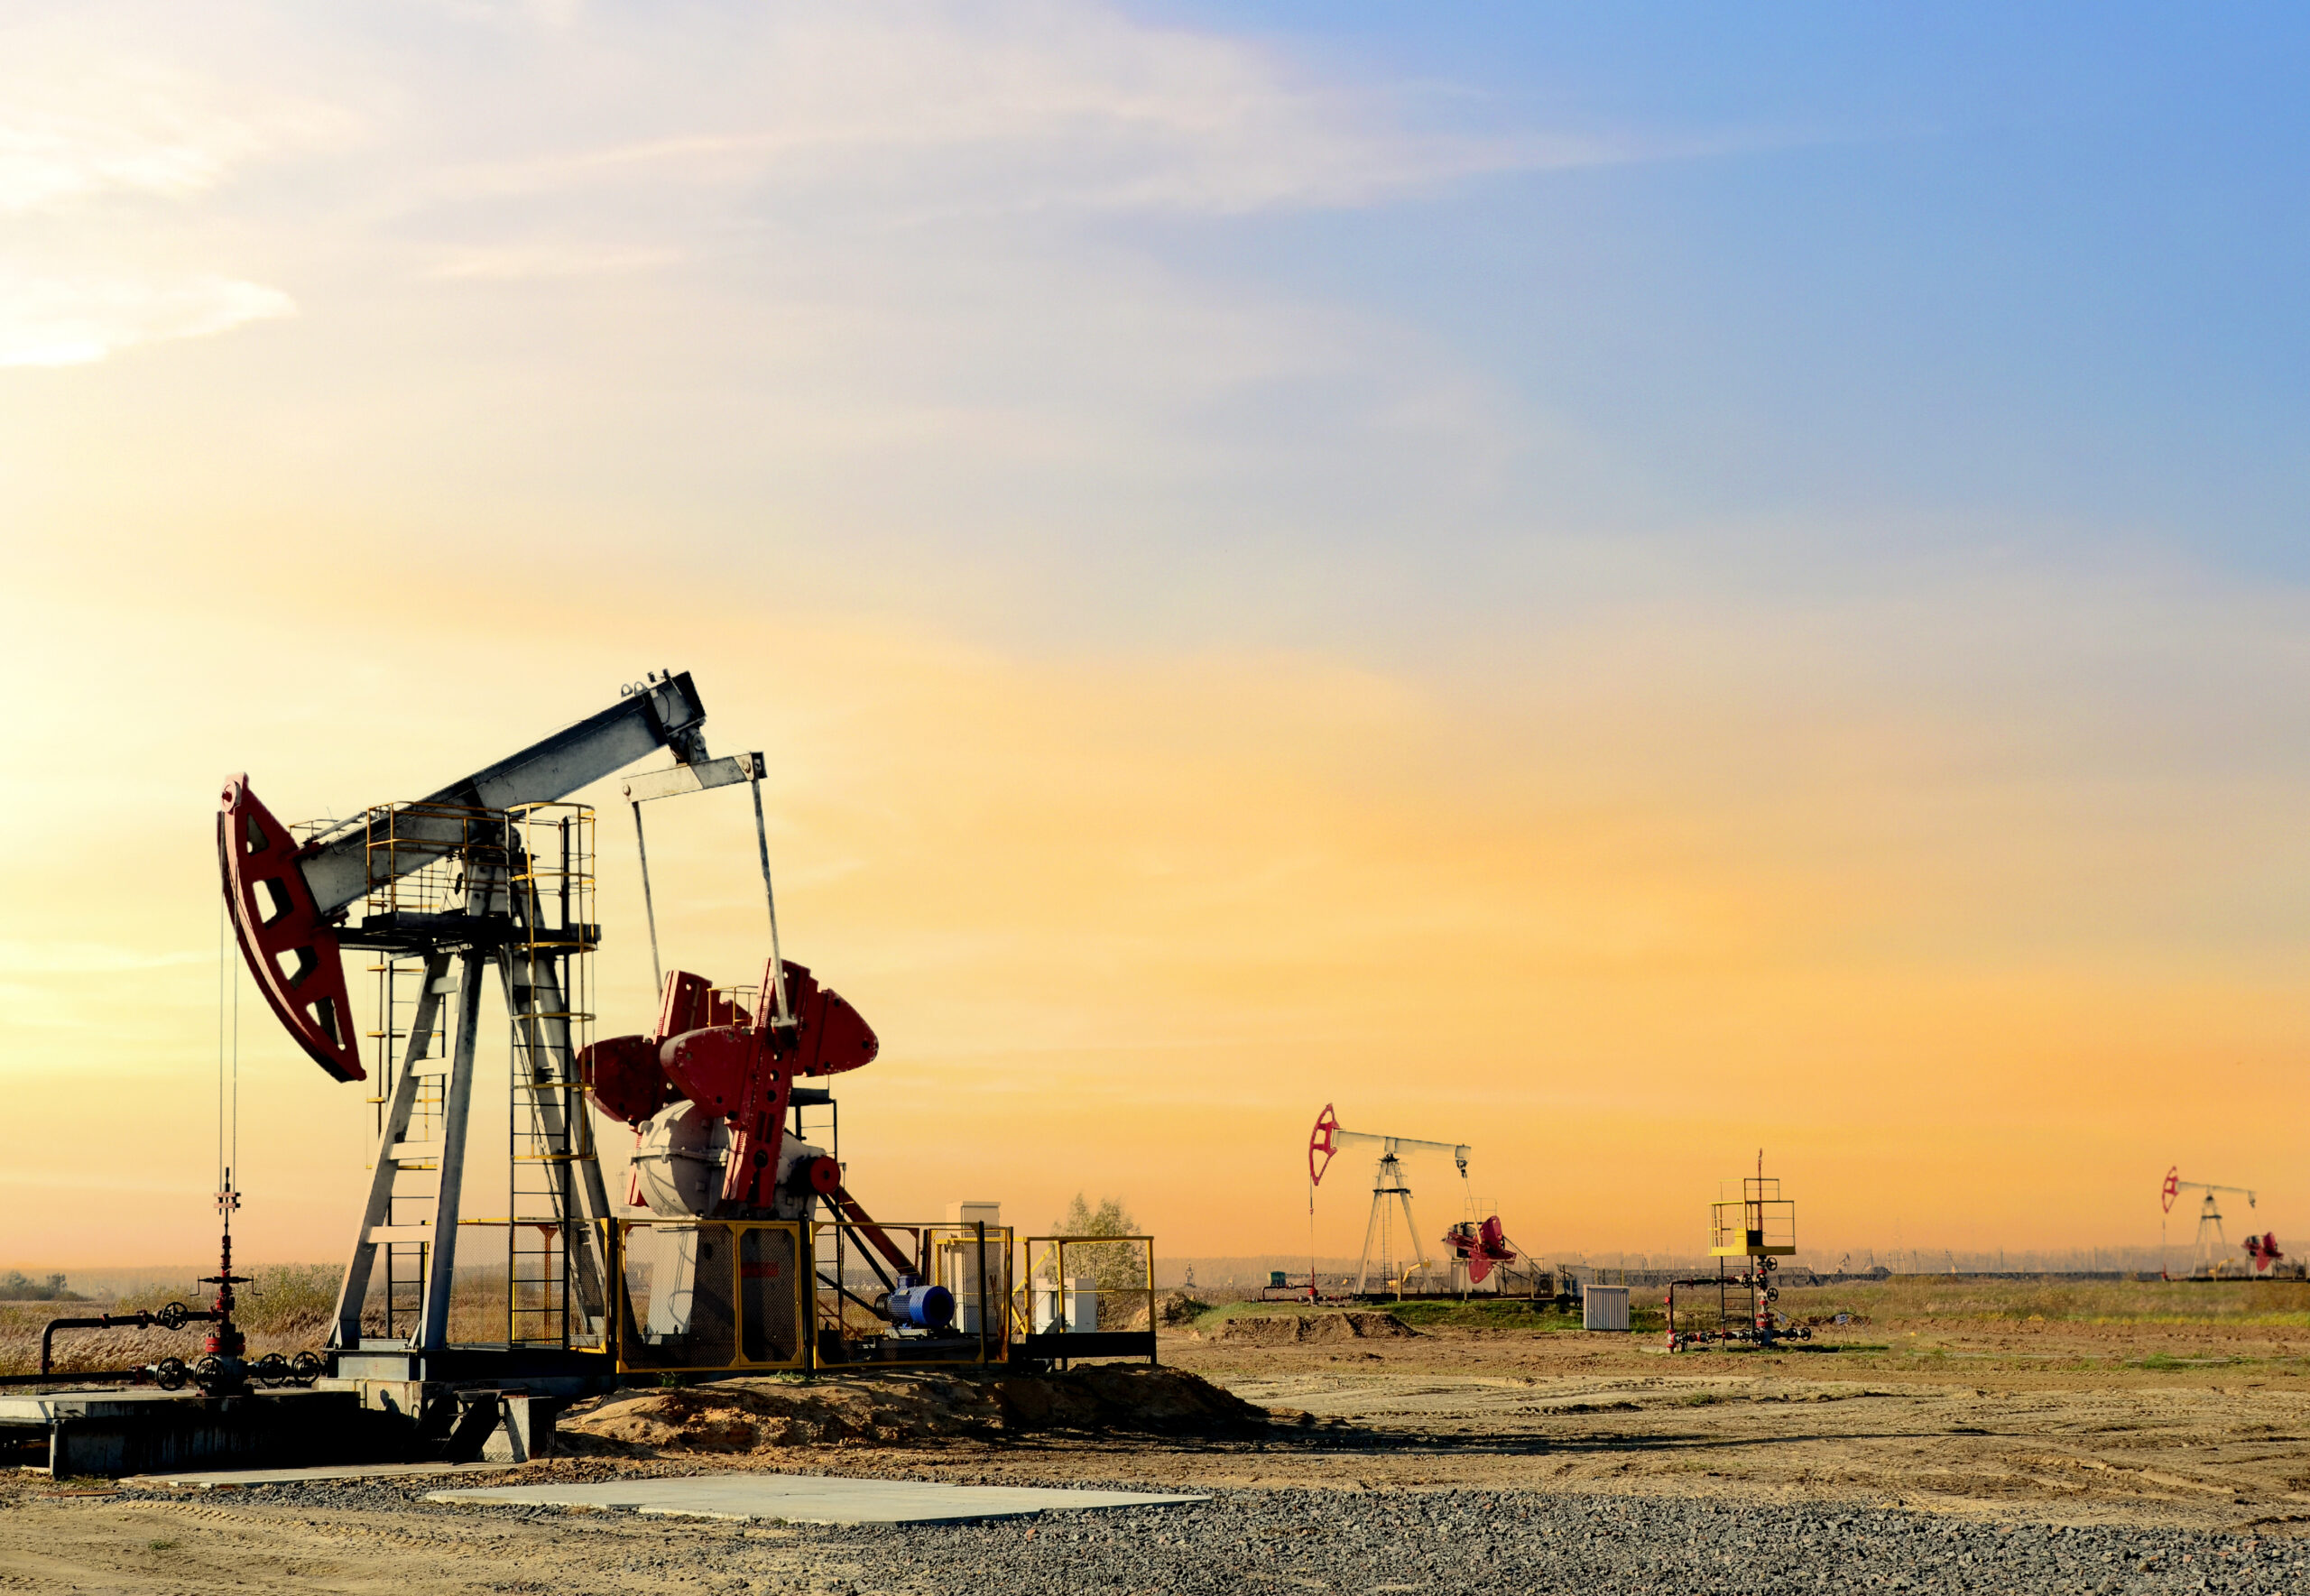 Crude oil pump jack at oilfield on atmospheric sunset backround. Fossil crude output and fuels oil production. Oil drill rig and drilling derrick. Global crude oil Prices, energy, petroleum demand